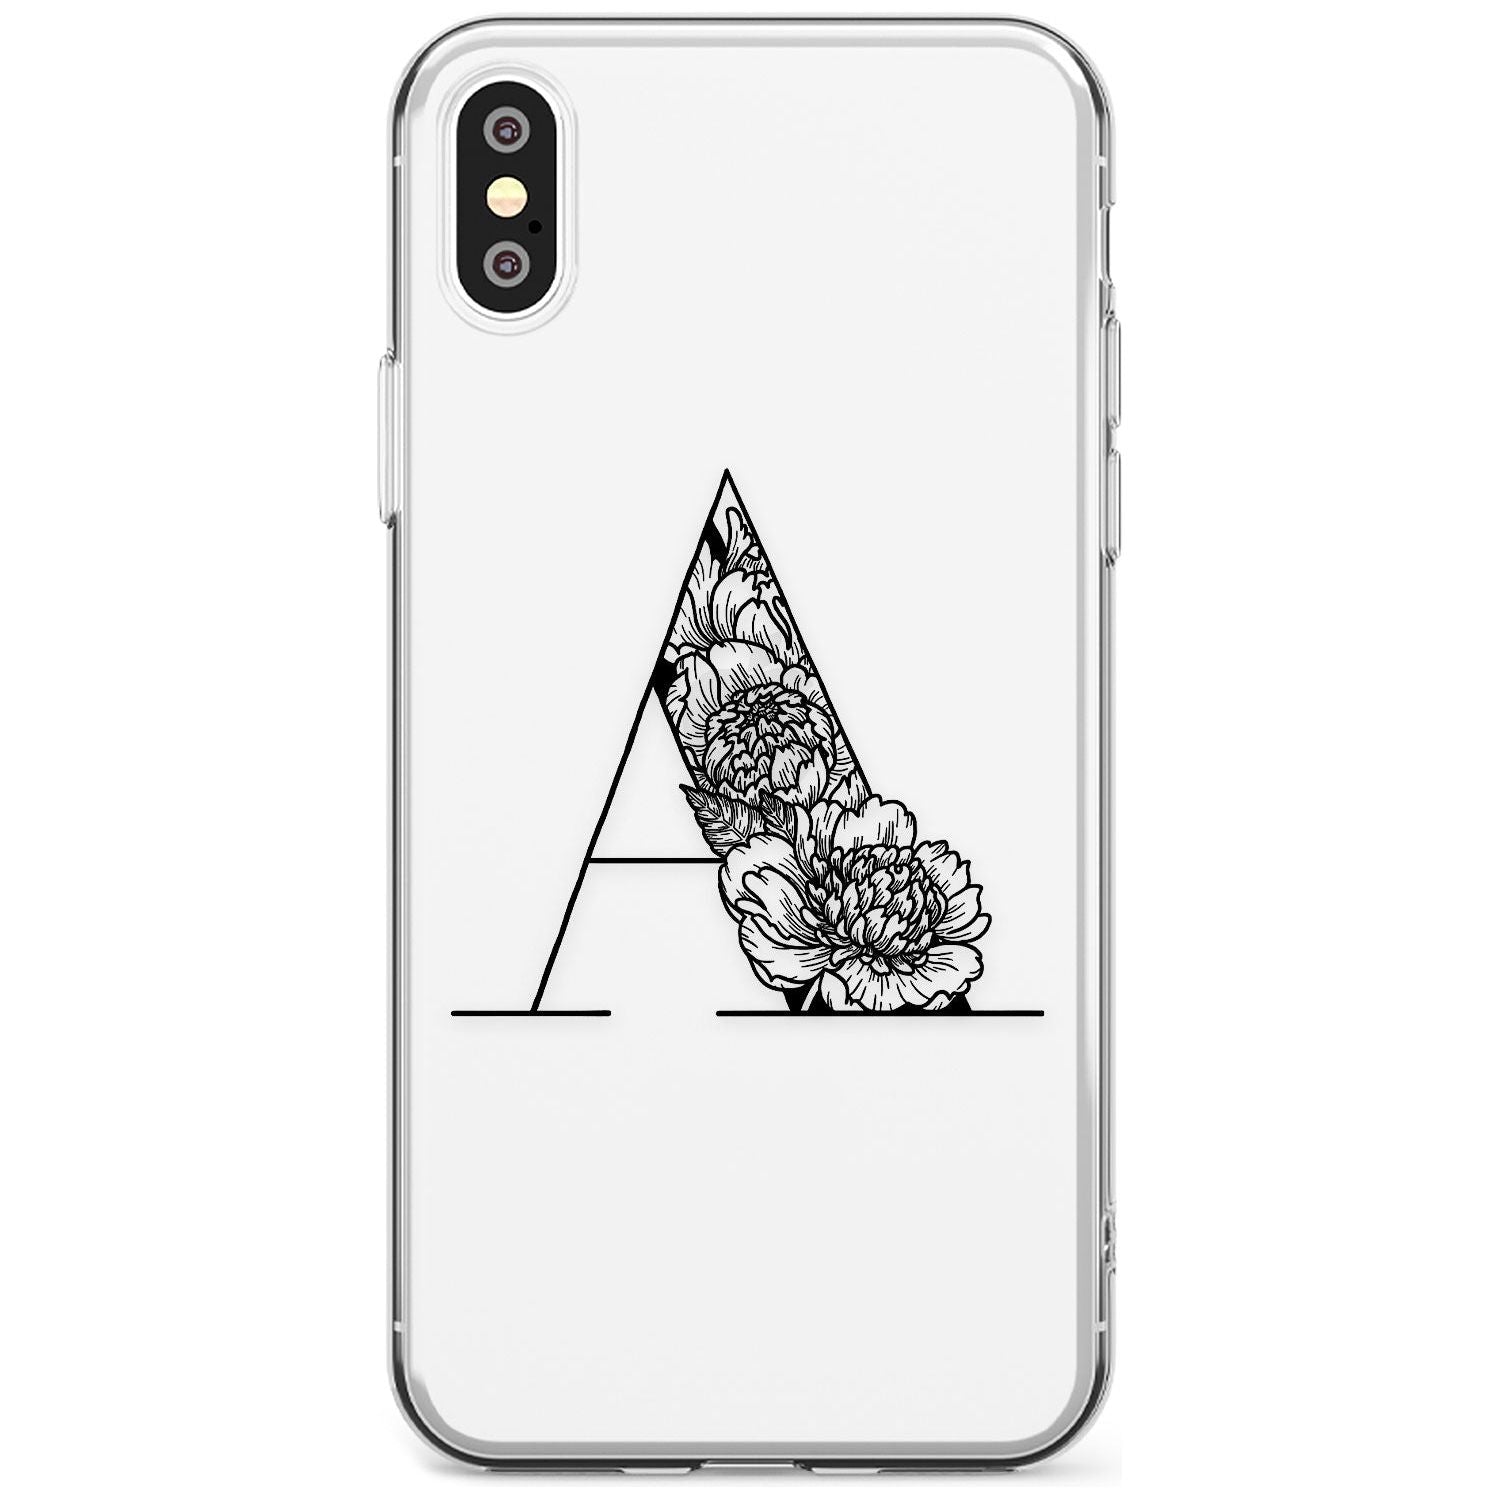 Floral Monogram Letter Black Impact Phone Case for iPhone X XS Max XR